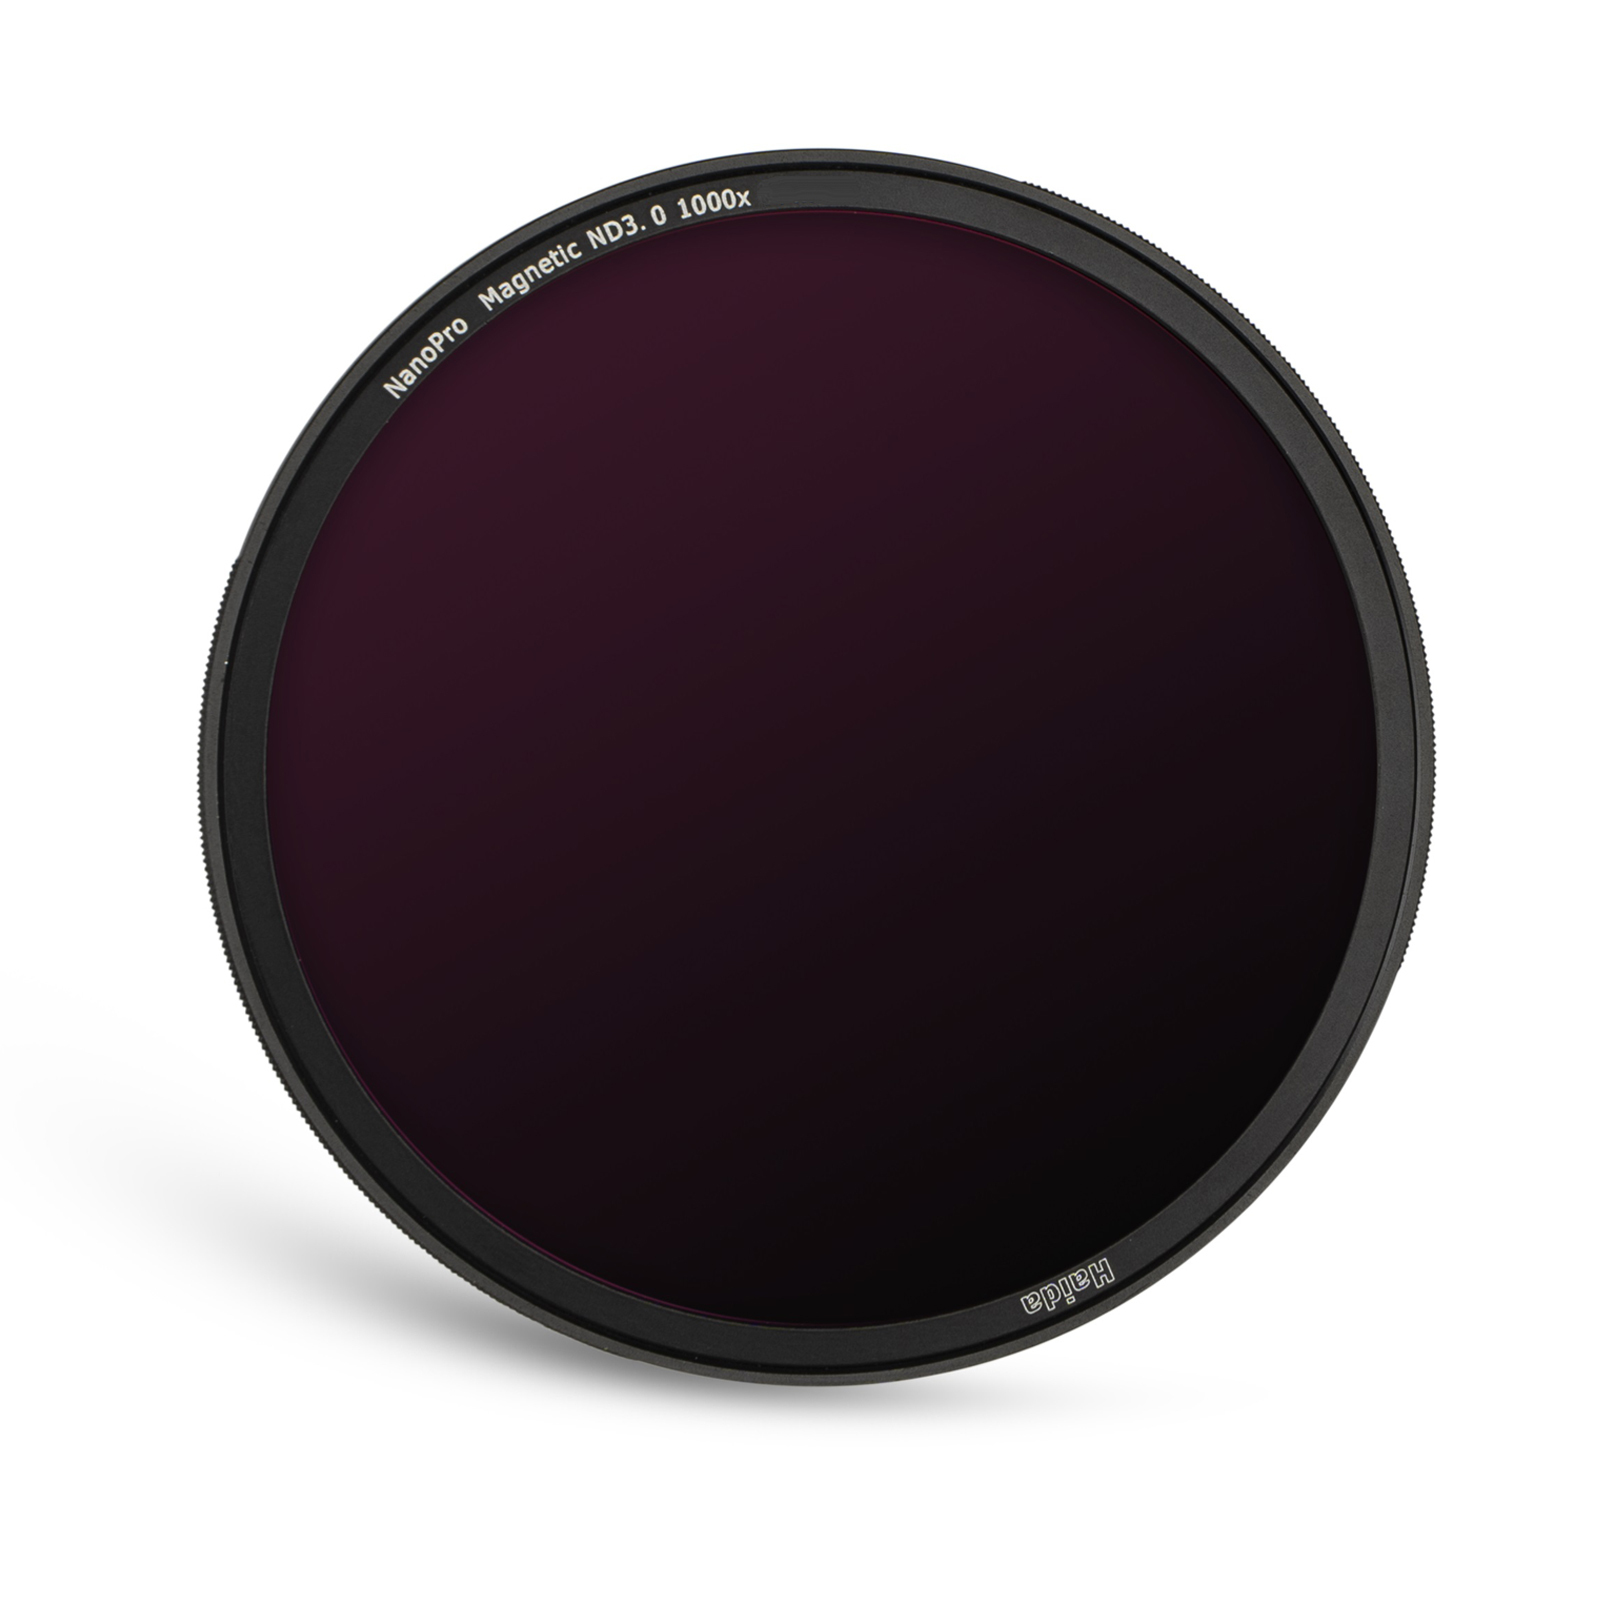 Haida NanoPro Magnetic ND 3.0 (1000x) Filter with Adapter Ring, 77mm - 10 Stop main image